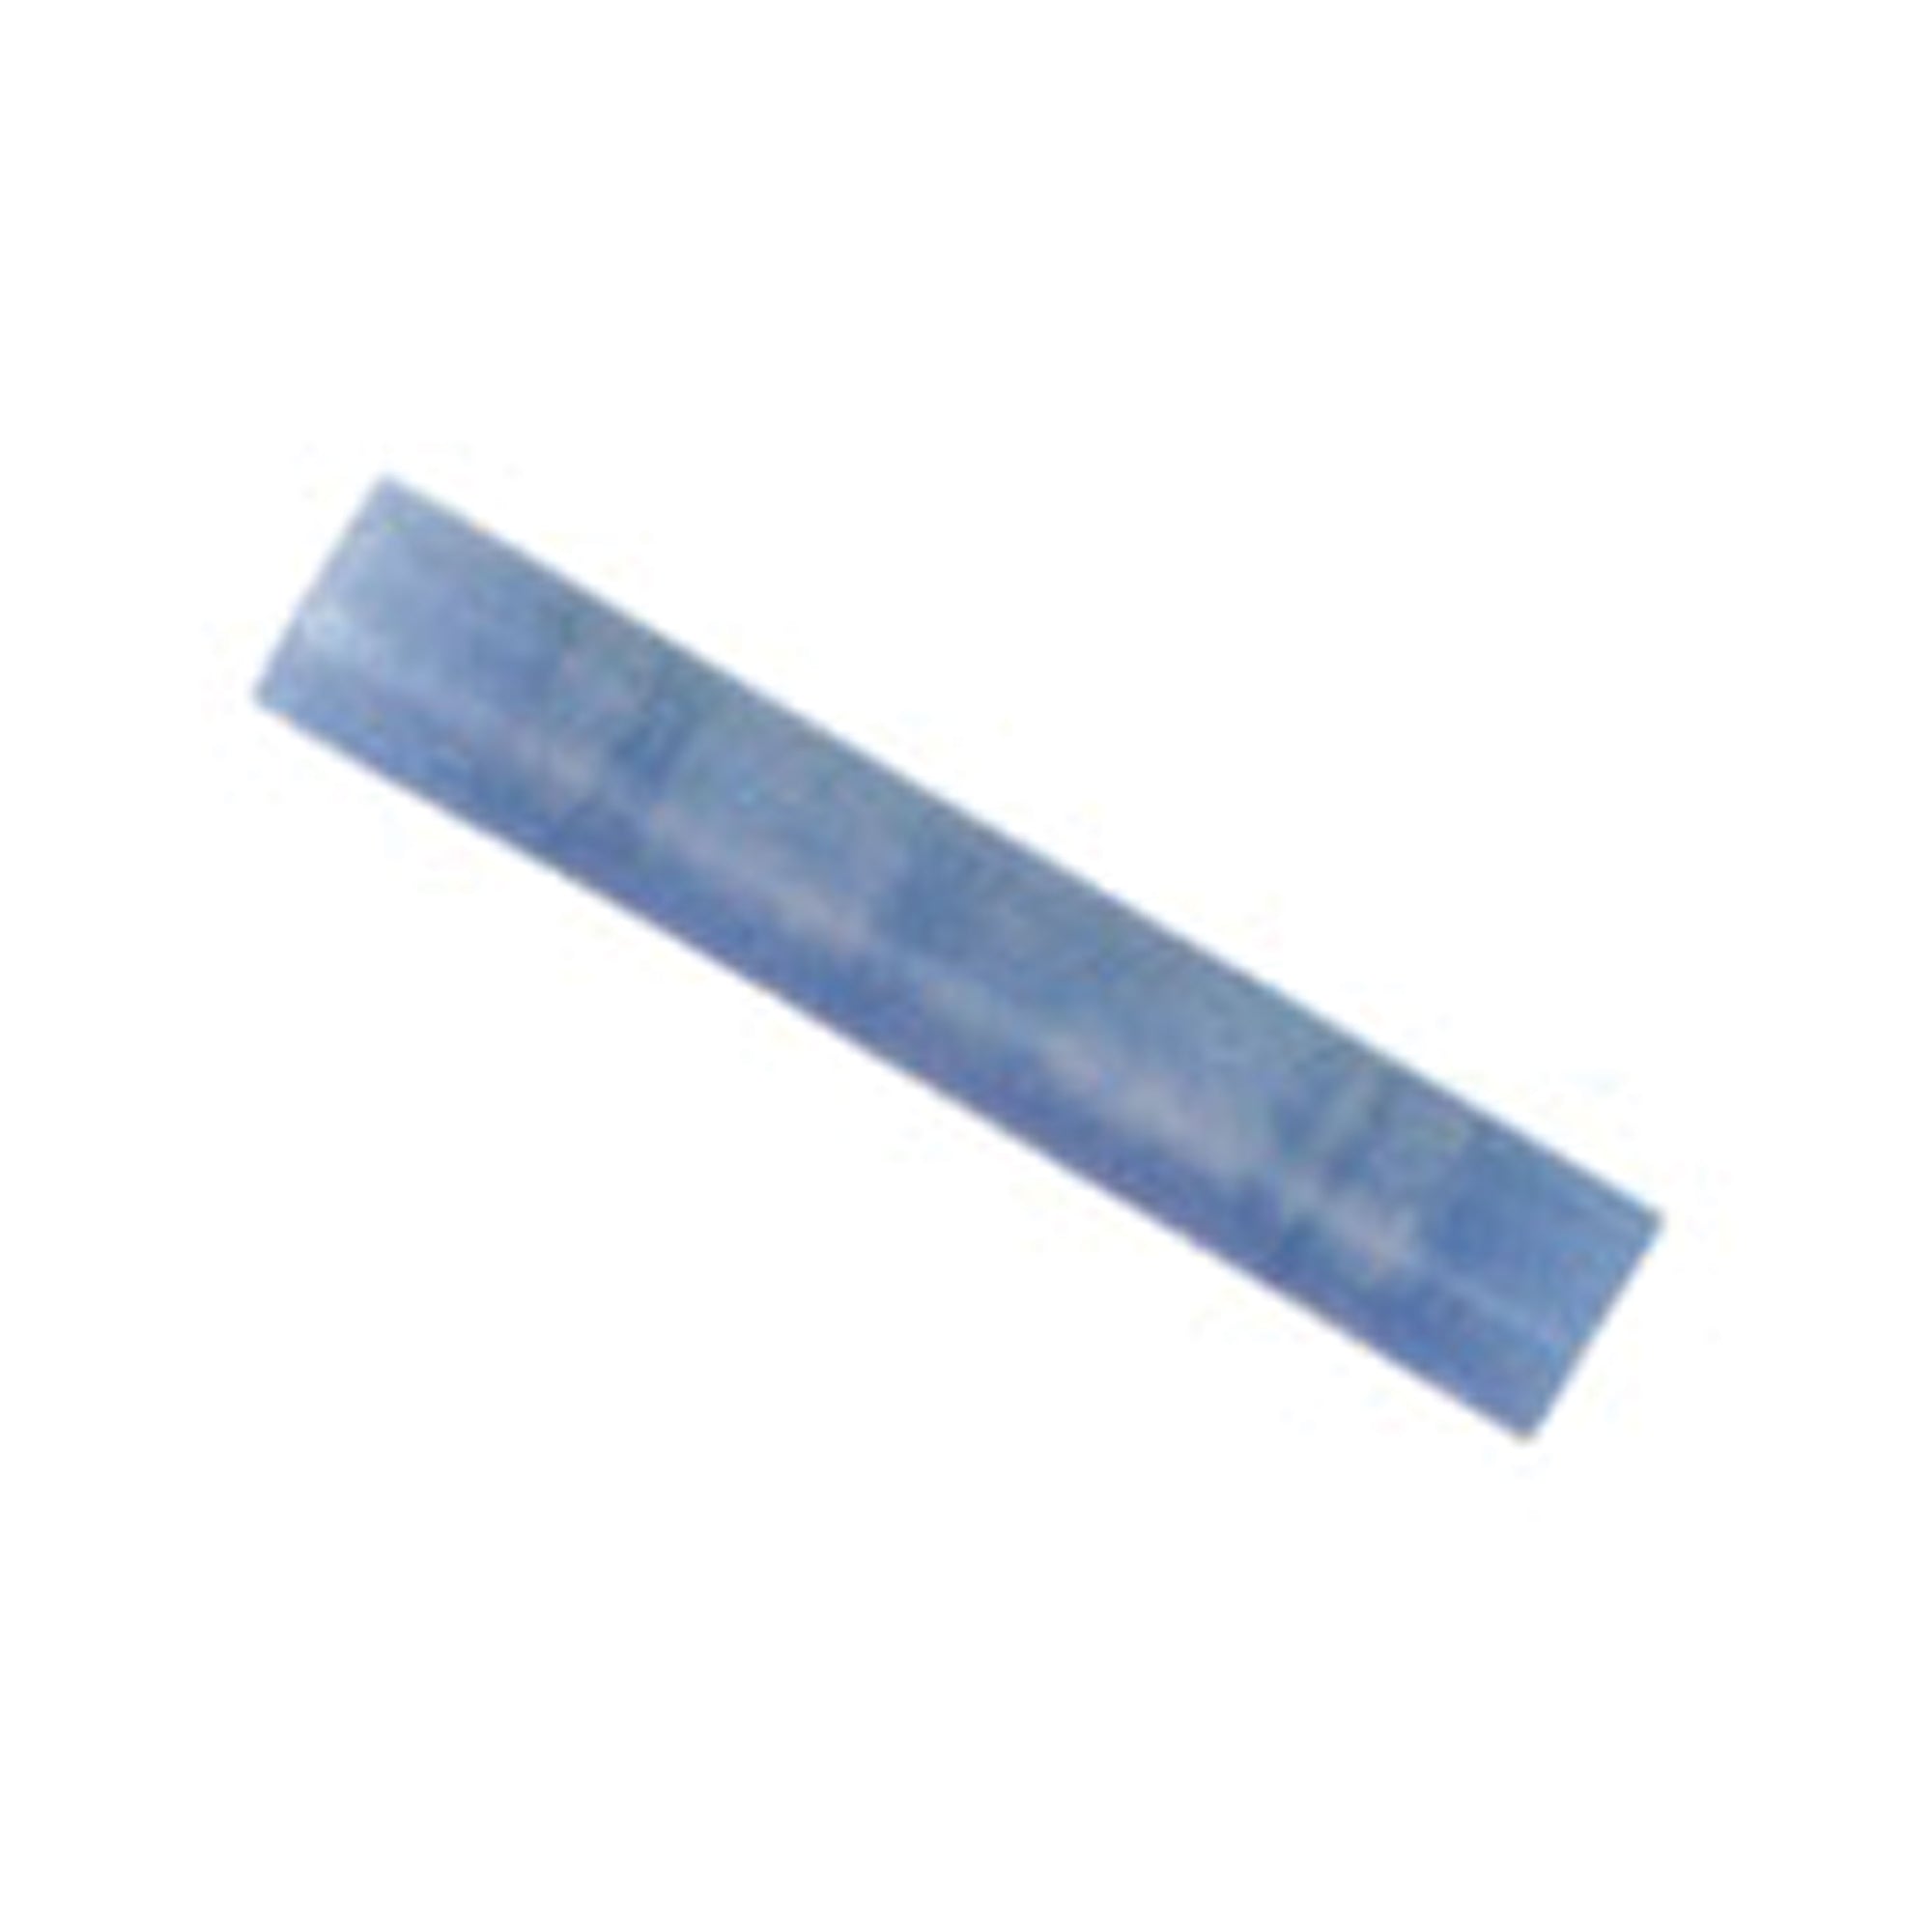 Ancor 220110 Marine Grade Butt Connector - 16-14, Blue, Pack of 100